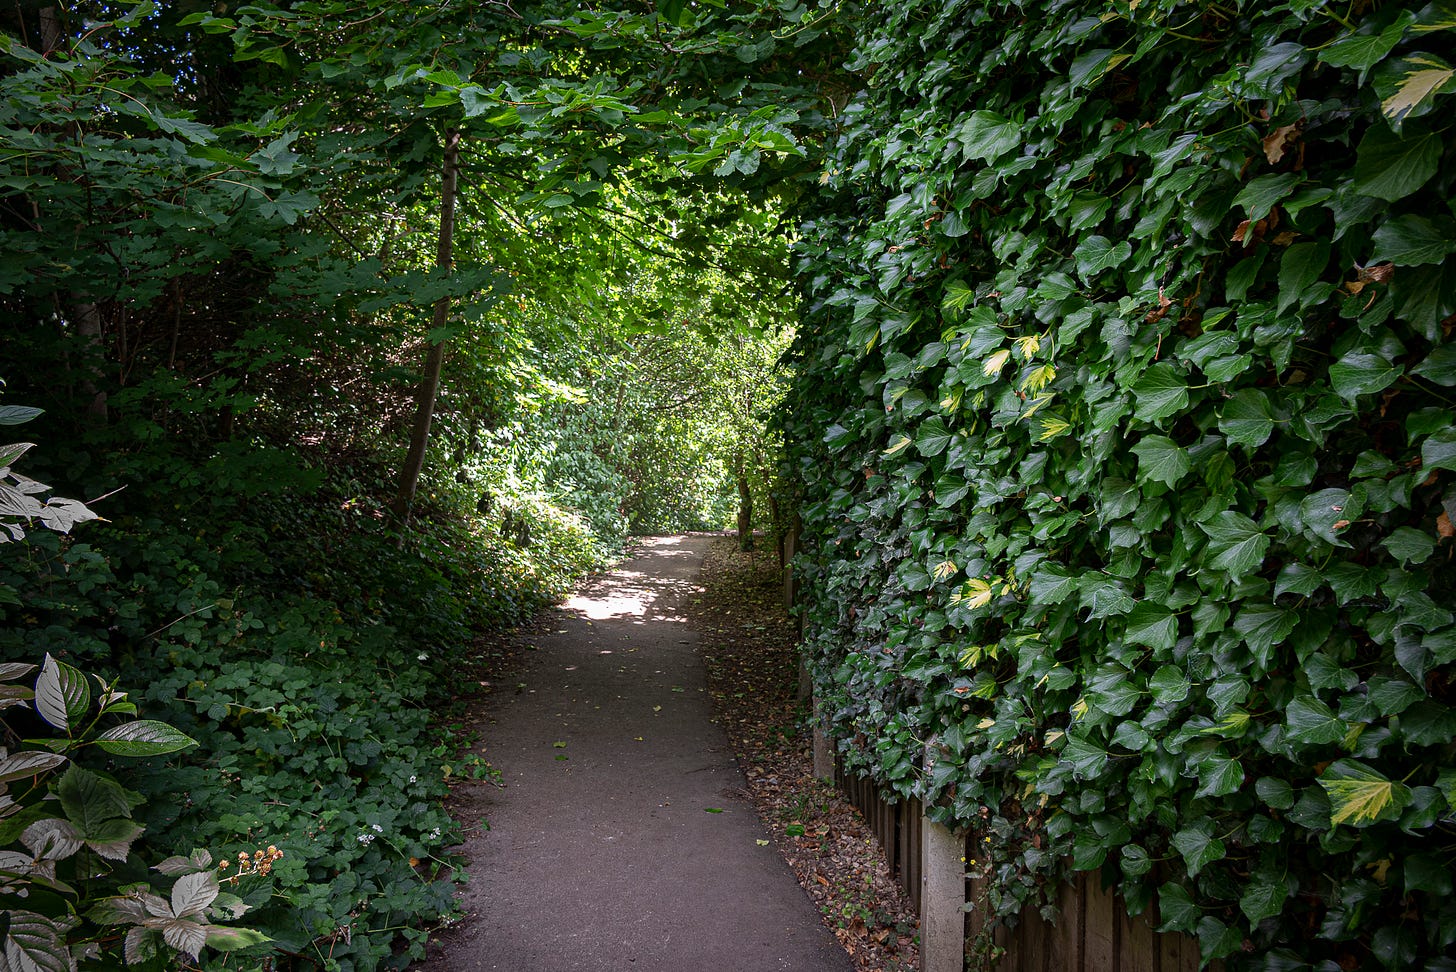 A pathway with the sun piercing through the tees and foliage on either side